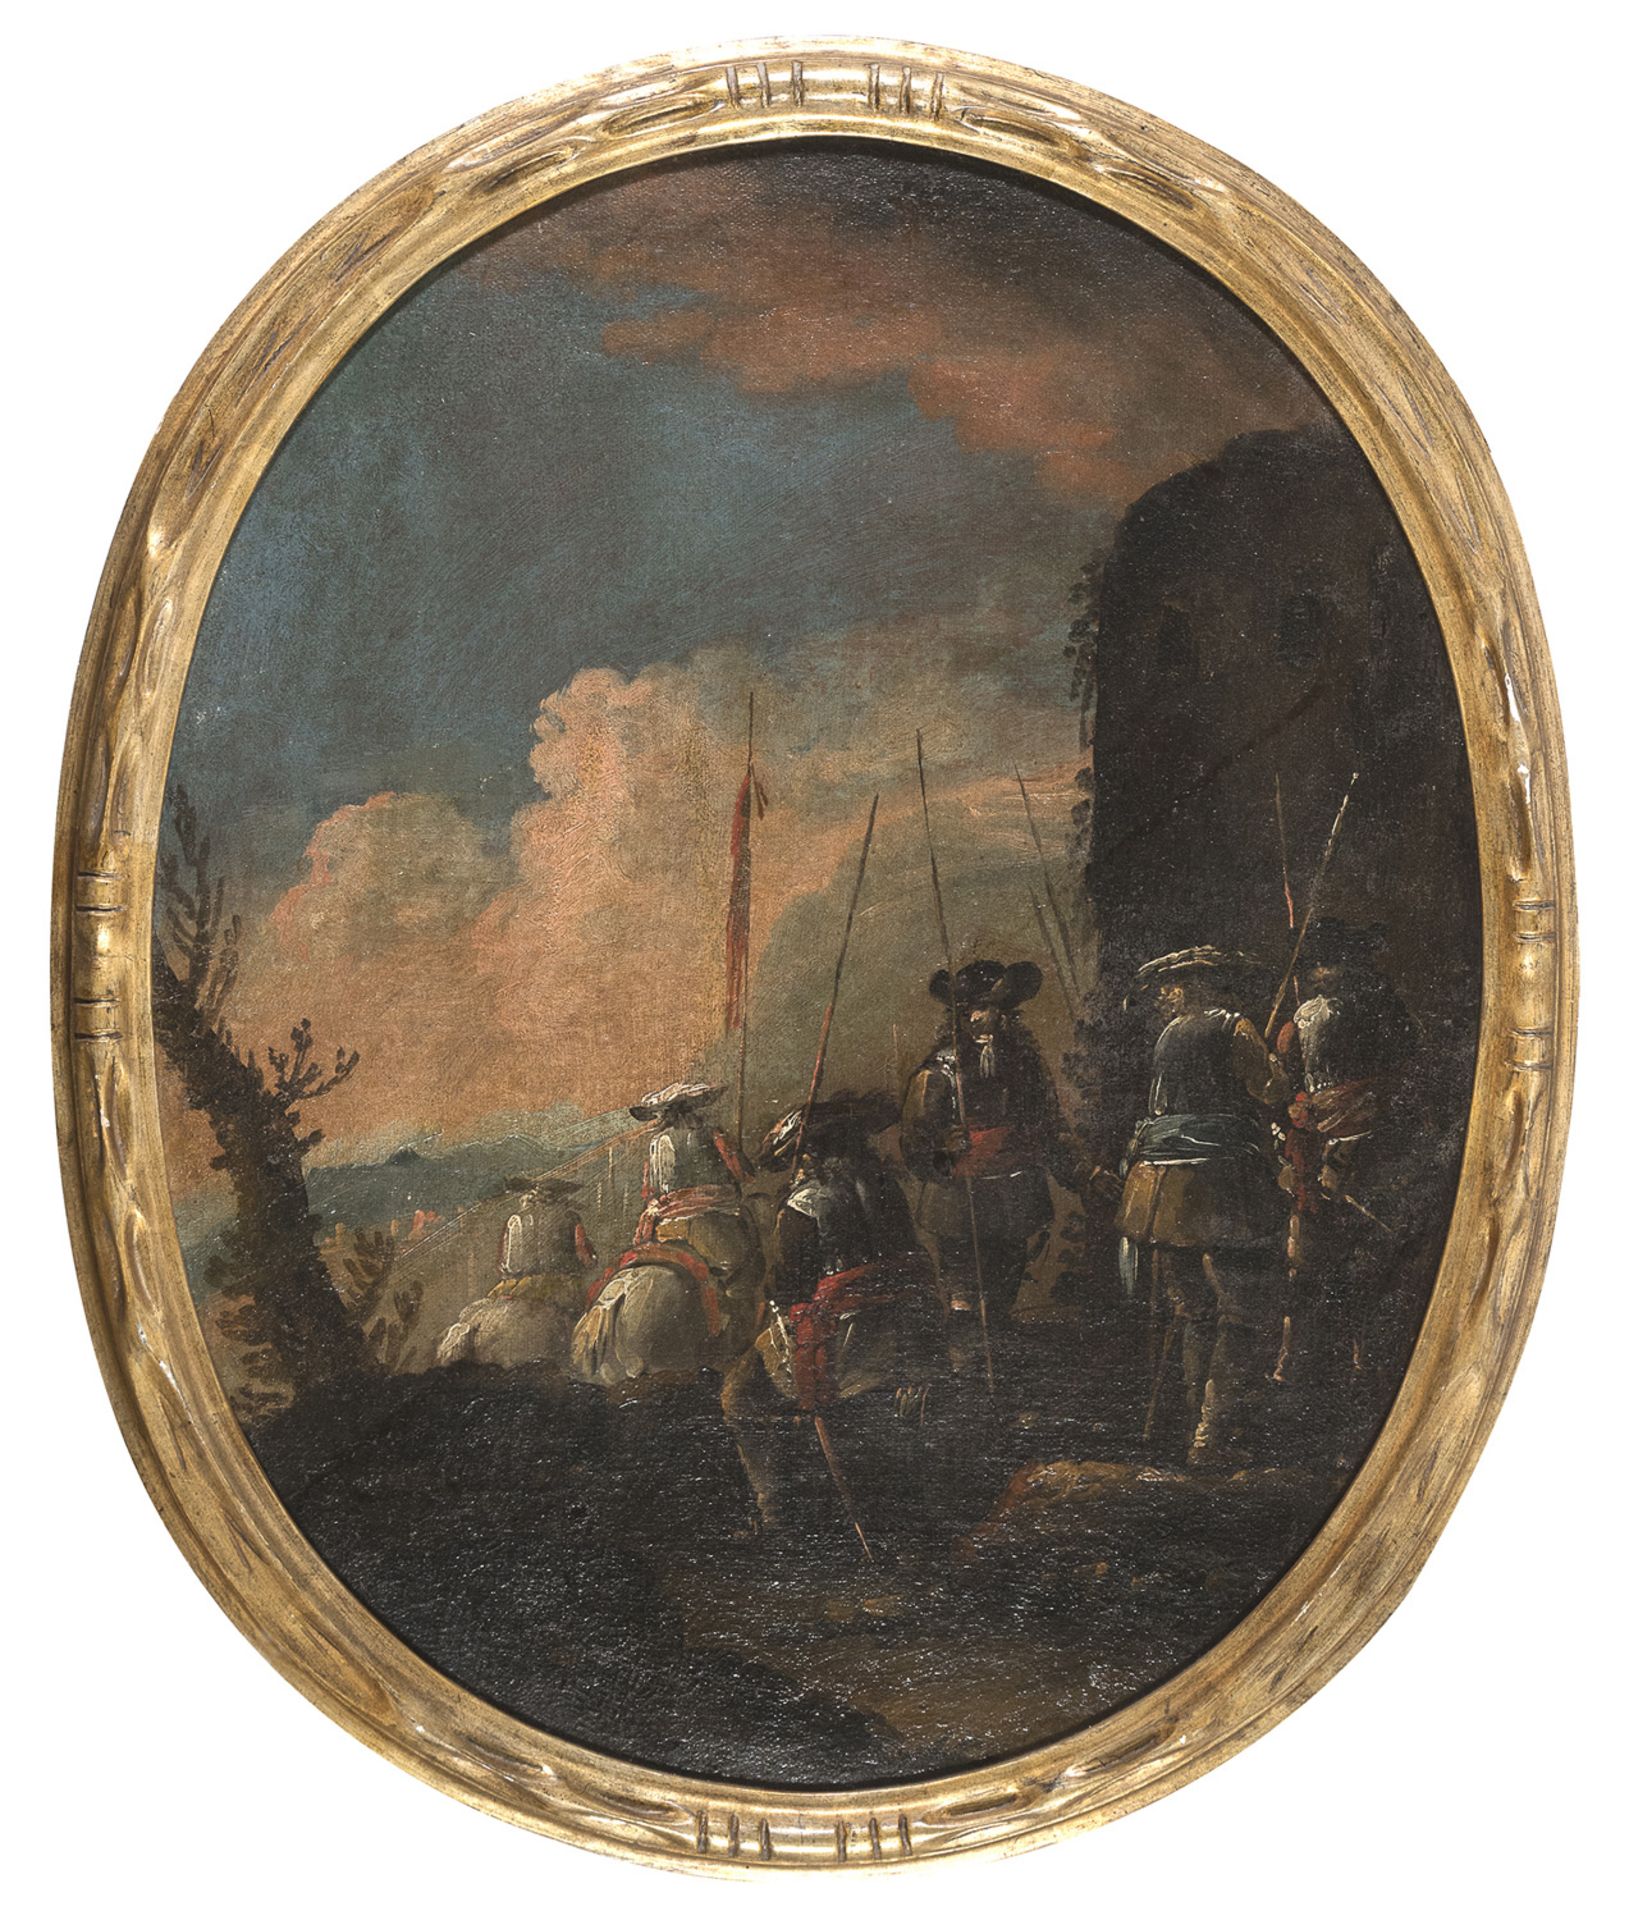 OIL PAINTING OF LANDSCAPE WITH KNIGHTS BY ANTONIO MARIA MARINI'S WORKSHOP